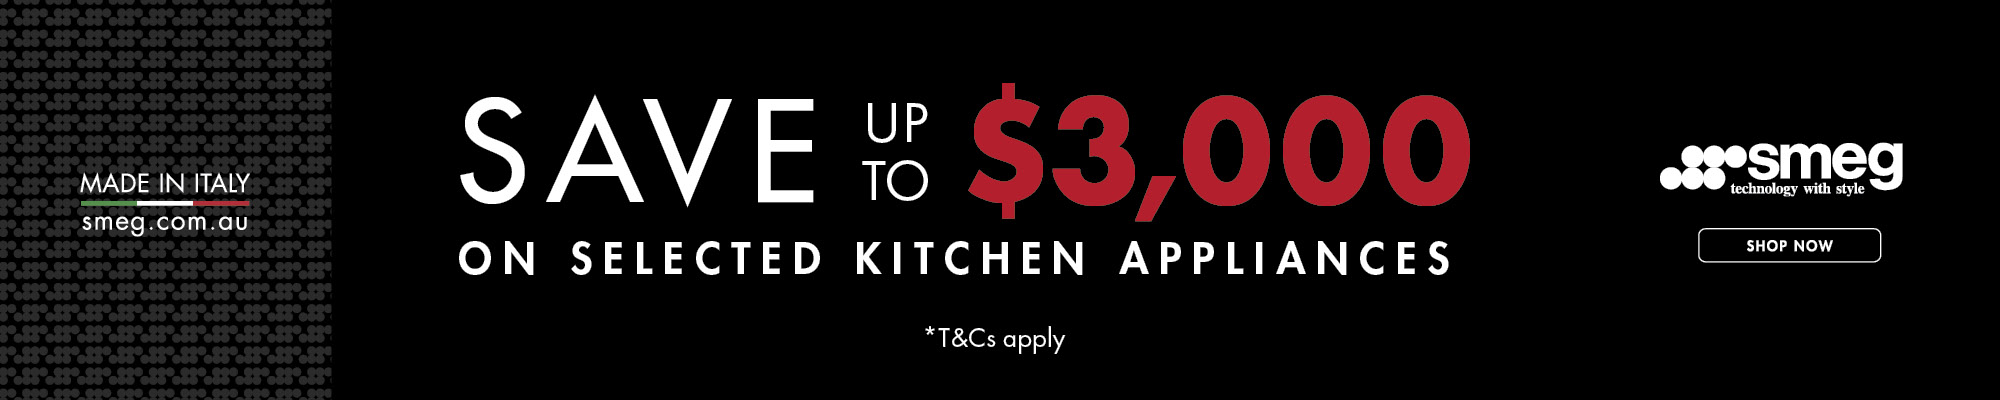 Save Up To $3,000 On Selected Smeg Kitchen Appliances*